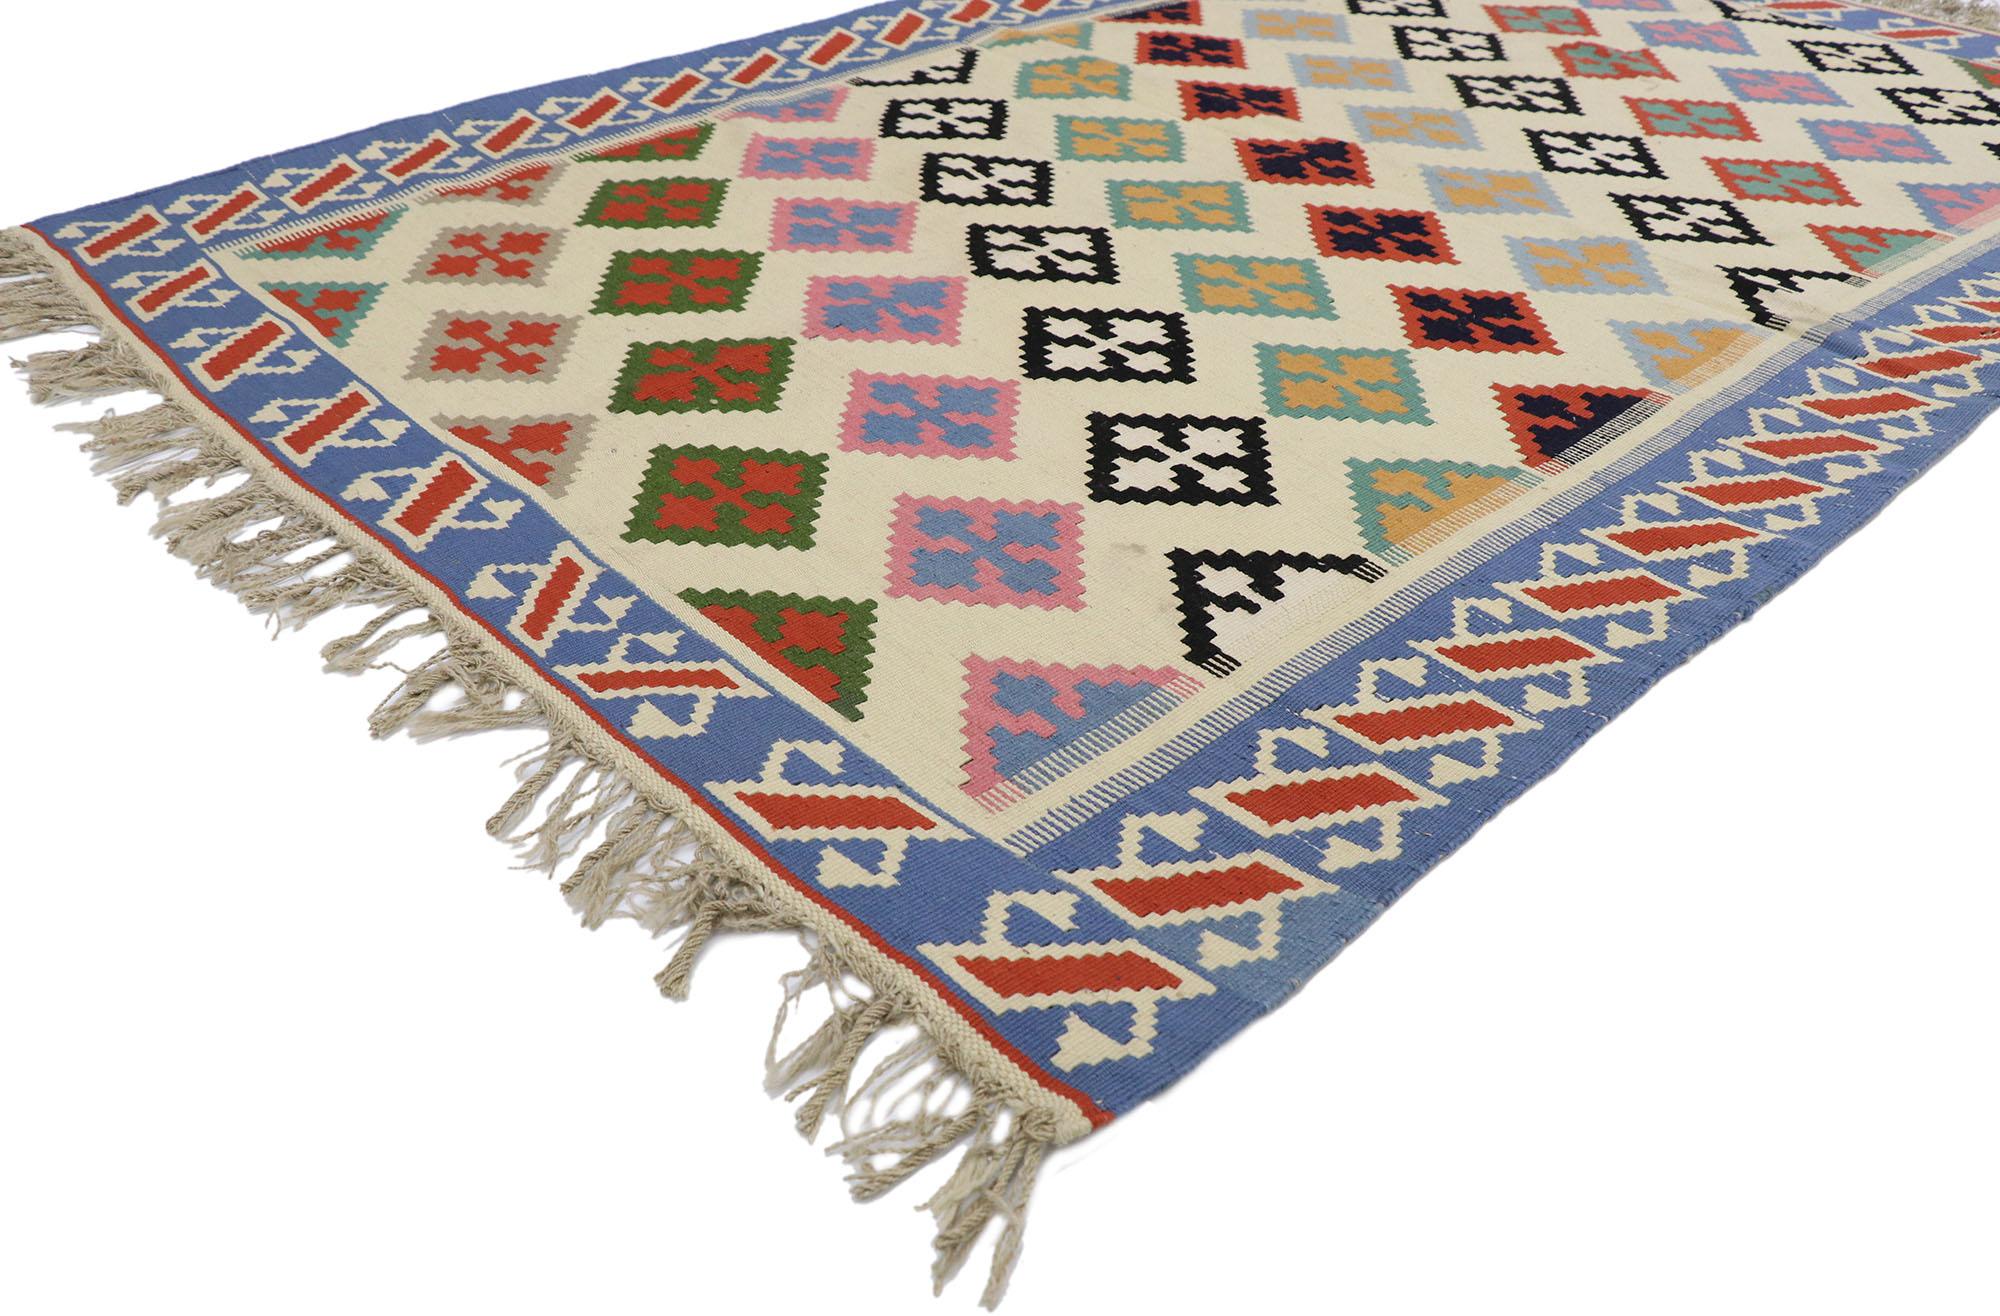 78028 vintage Persian Shiraz Kilim rug with Tribal style 04'02 x 06'04. Full of tiny details and a bold expressive design combined with vibrant colors and tribal style, this hand-woven wool vintage Persian Shiraz kilim rug is a captivating vision of